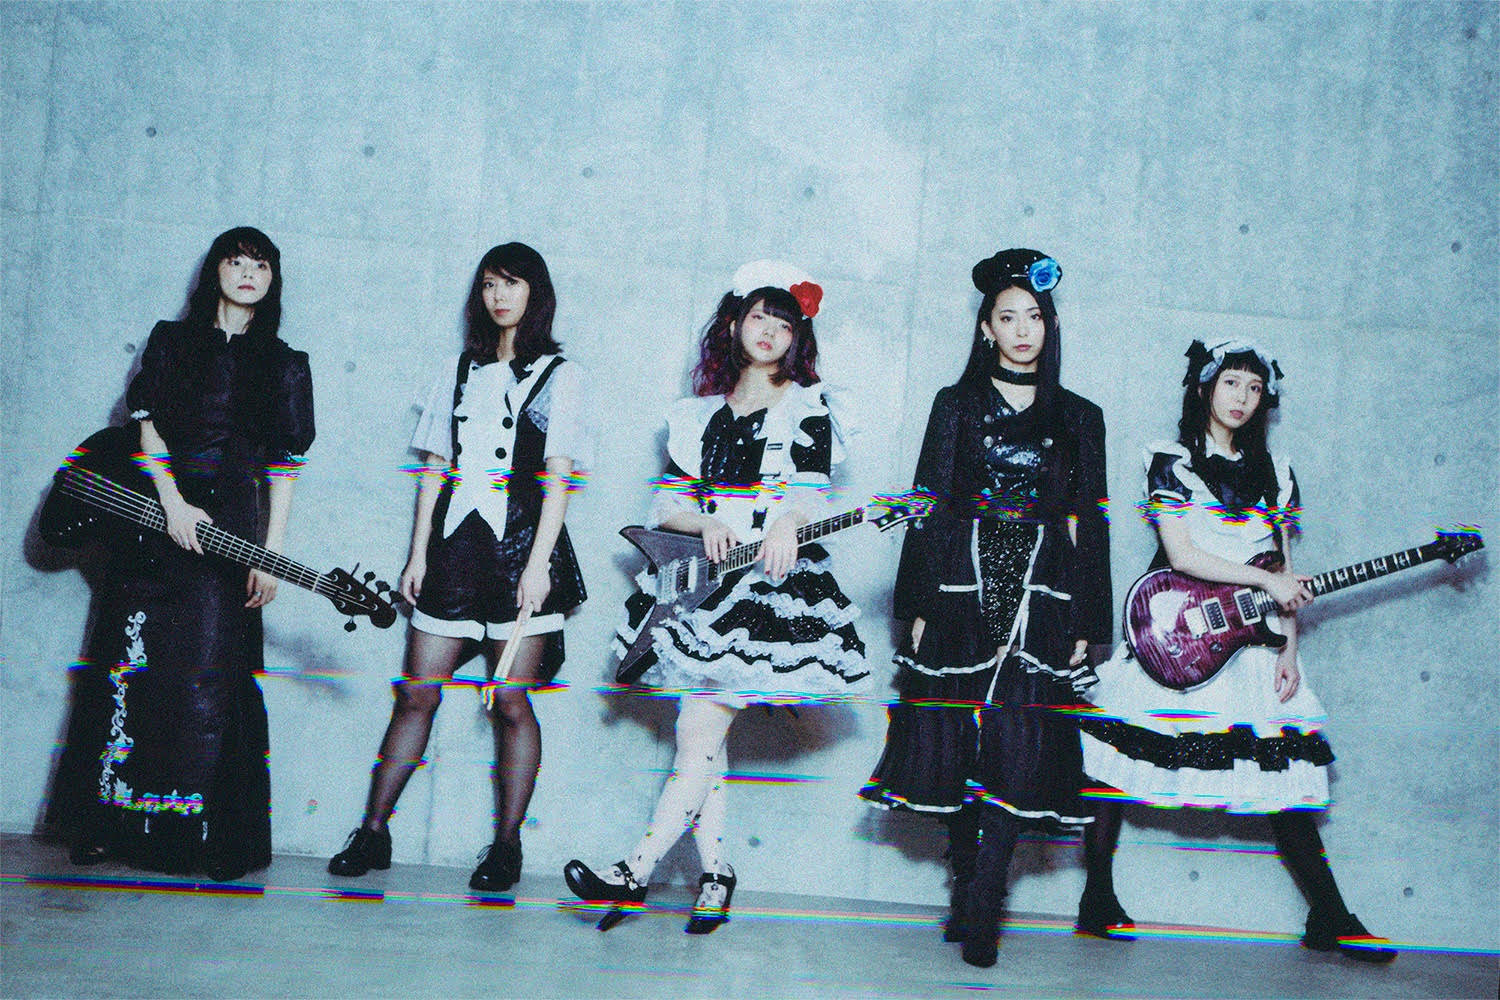 BAND-MAID Release Blu-ray Of Their Worldwide Live Streamed Concert